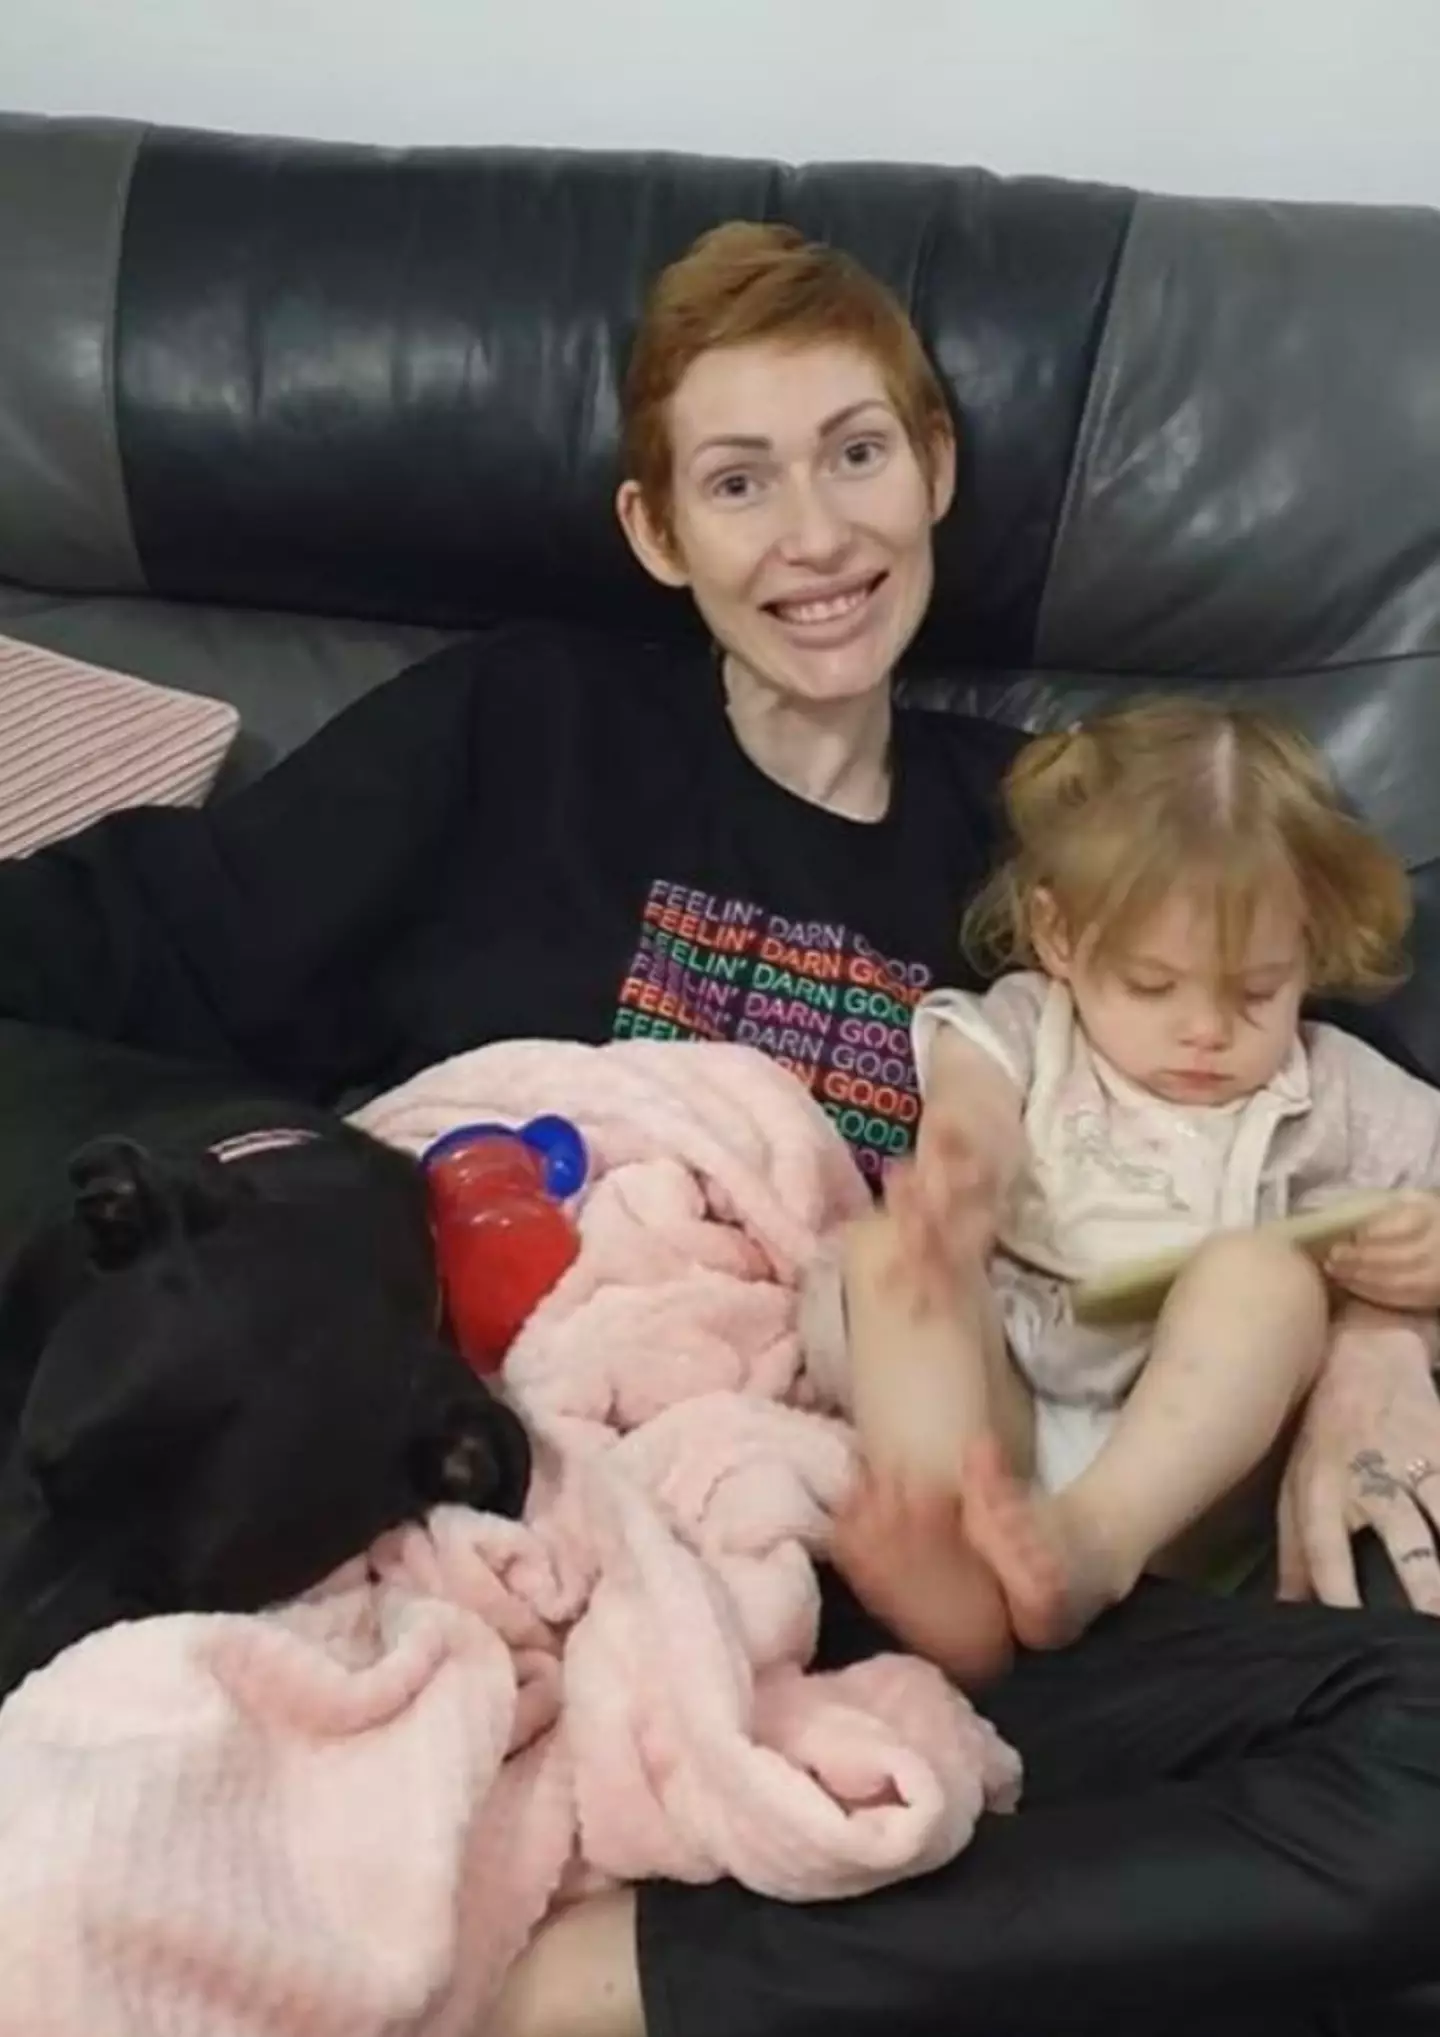 After welcoming her daughter, the mum's cancer came back.